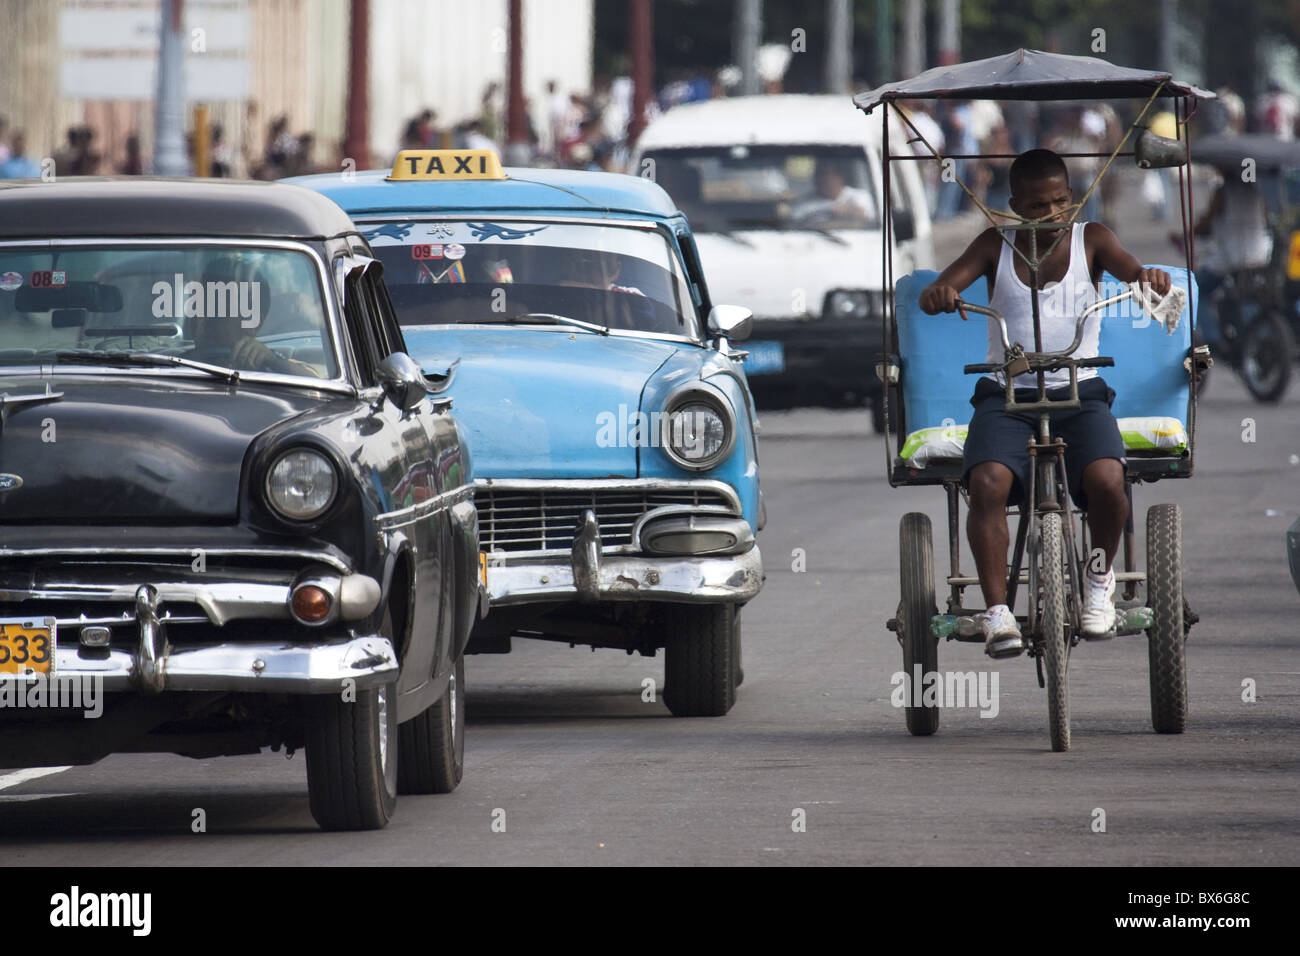 Vintage American cars and a bici (bicycle taxi) in Havana, Cuba, West Indies, Central America Stock Photo